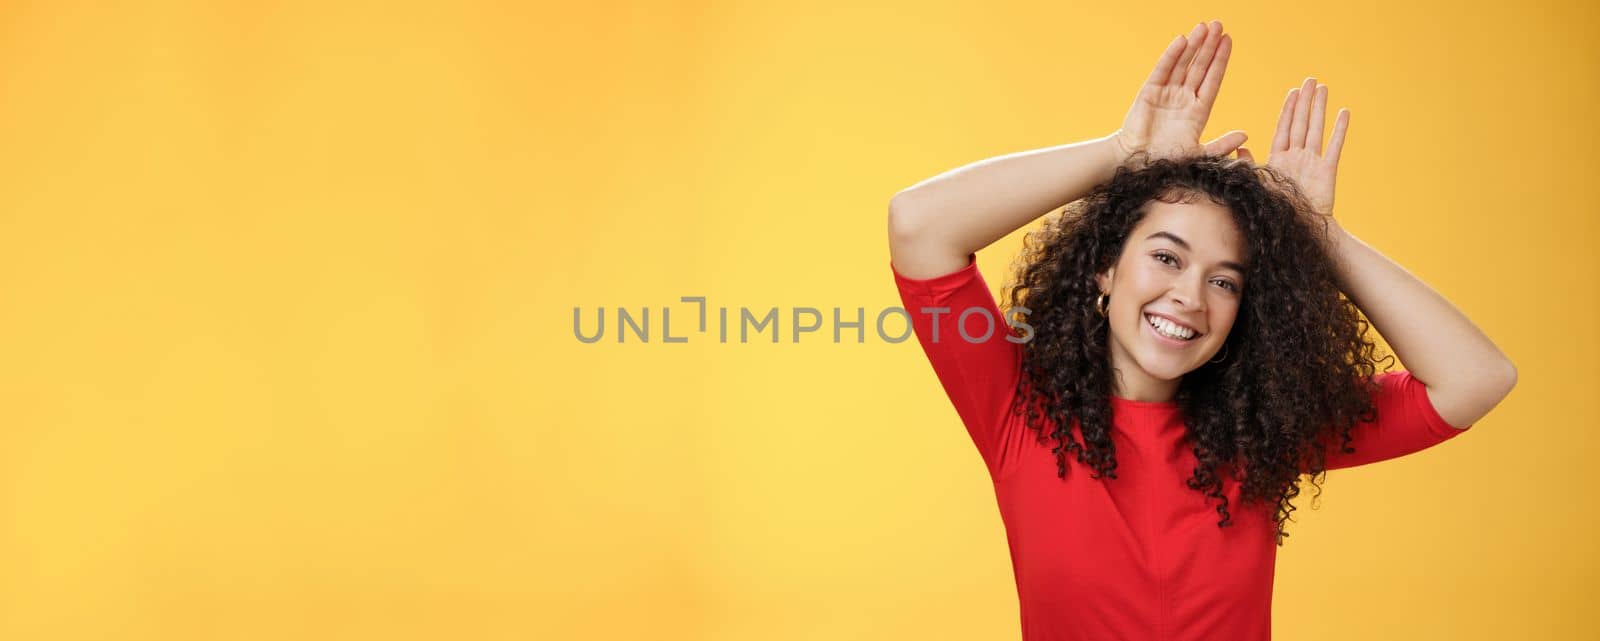 Close-up shot of charismatic playful and tender young kind woman with curly hair playing having fun showing bunny ears with hands on head tilting head joyfully fooling around and smiling at camera by Benzoix